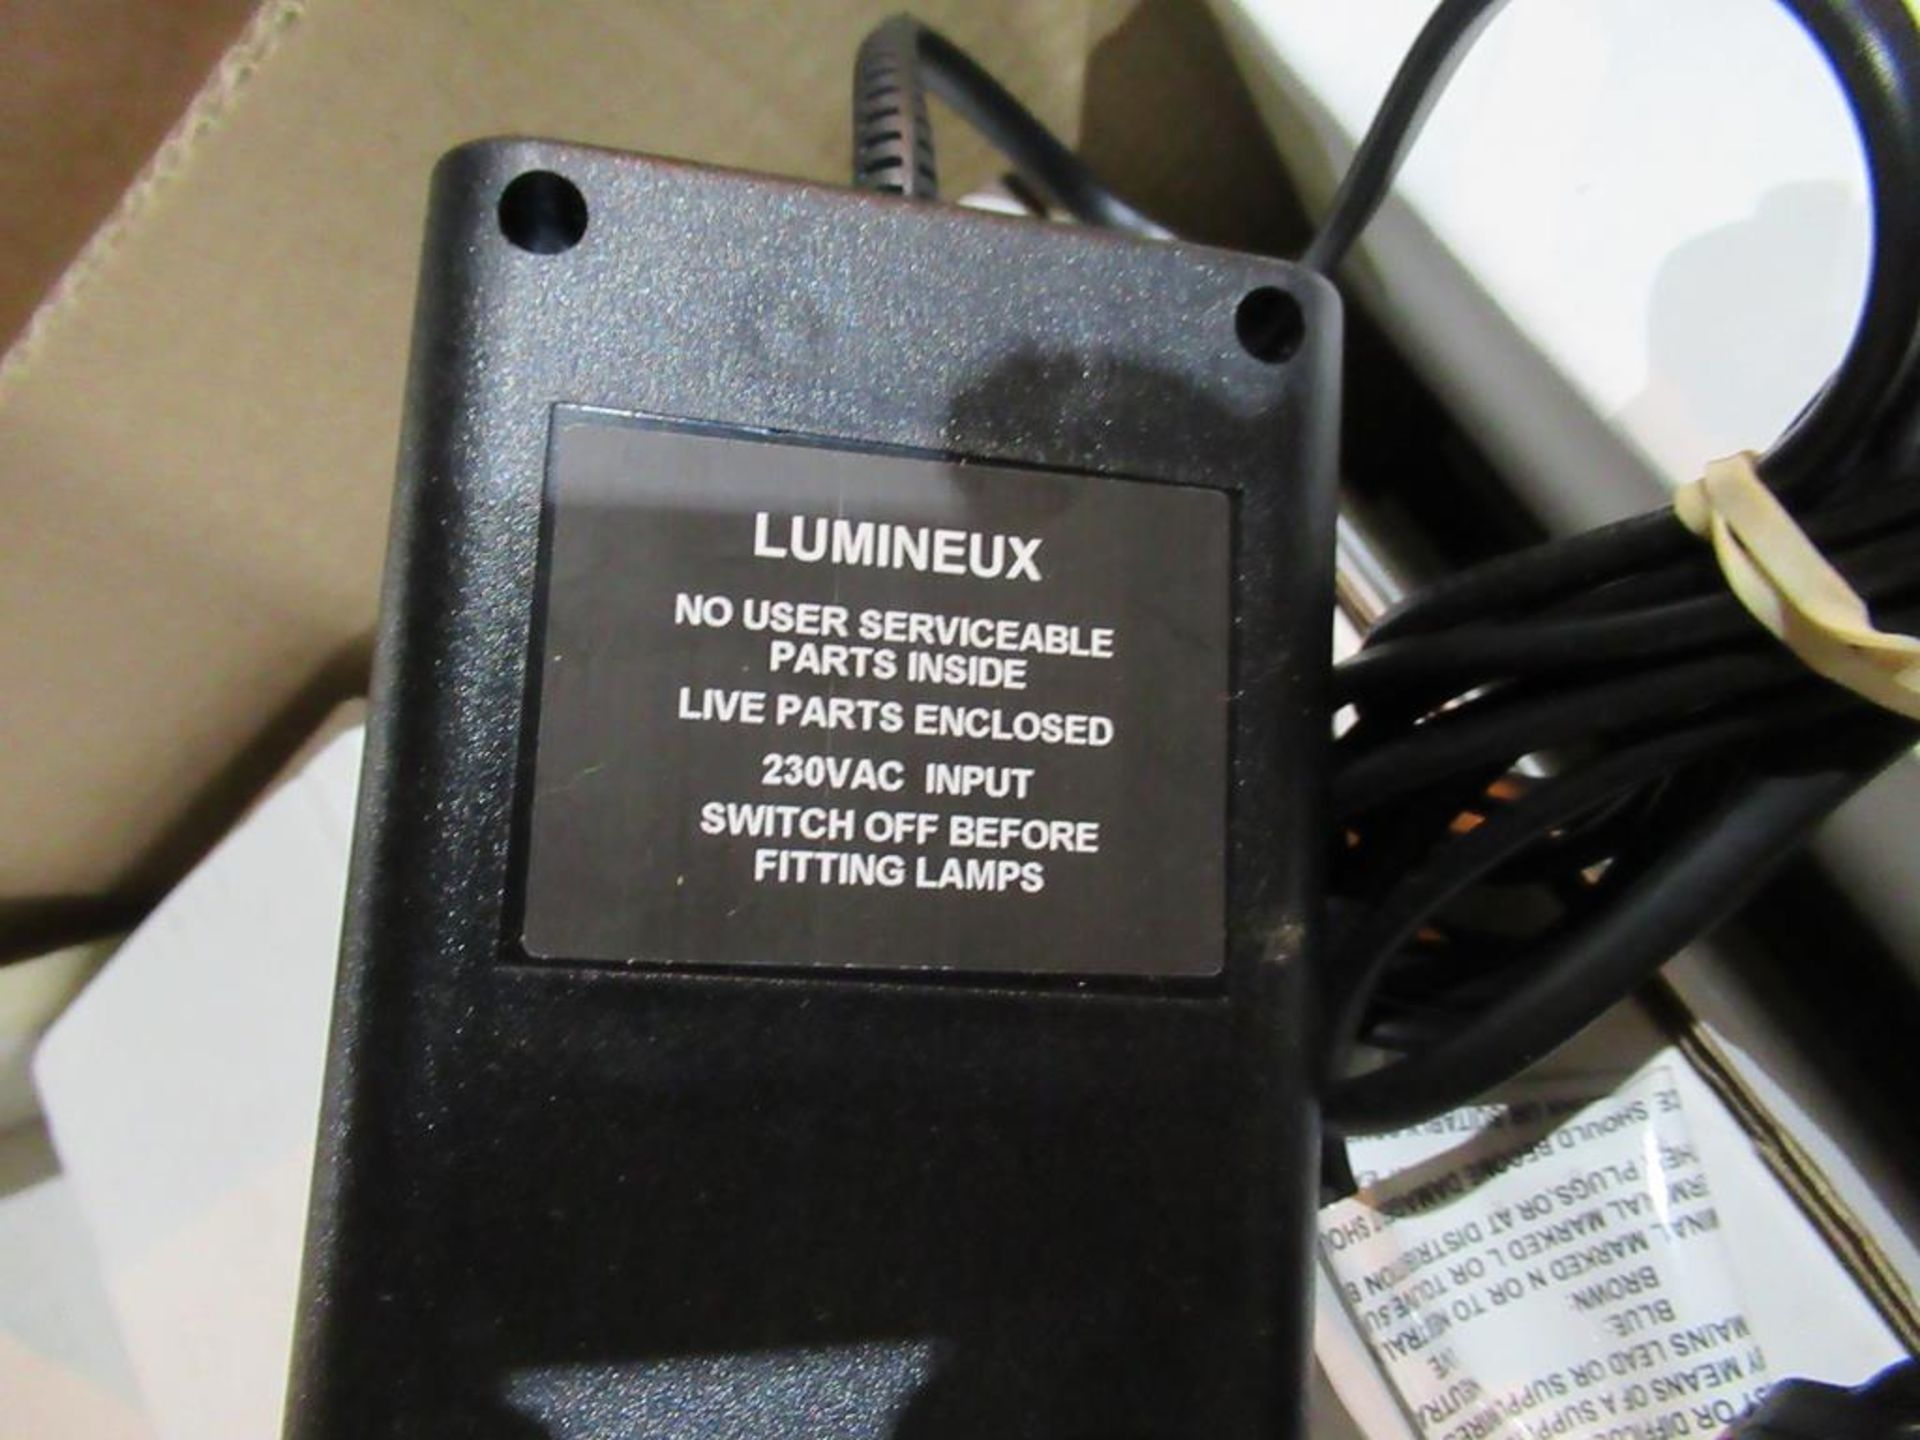 90x Lumineux GU10 Demo Box complete with UK Mains Lead & Switch - Image 3 of 4